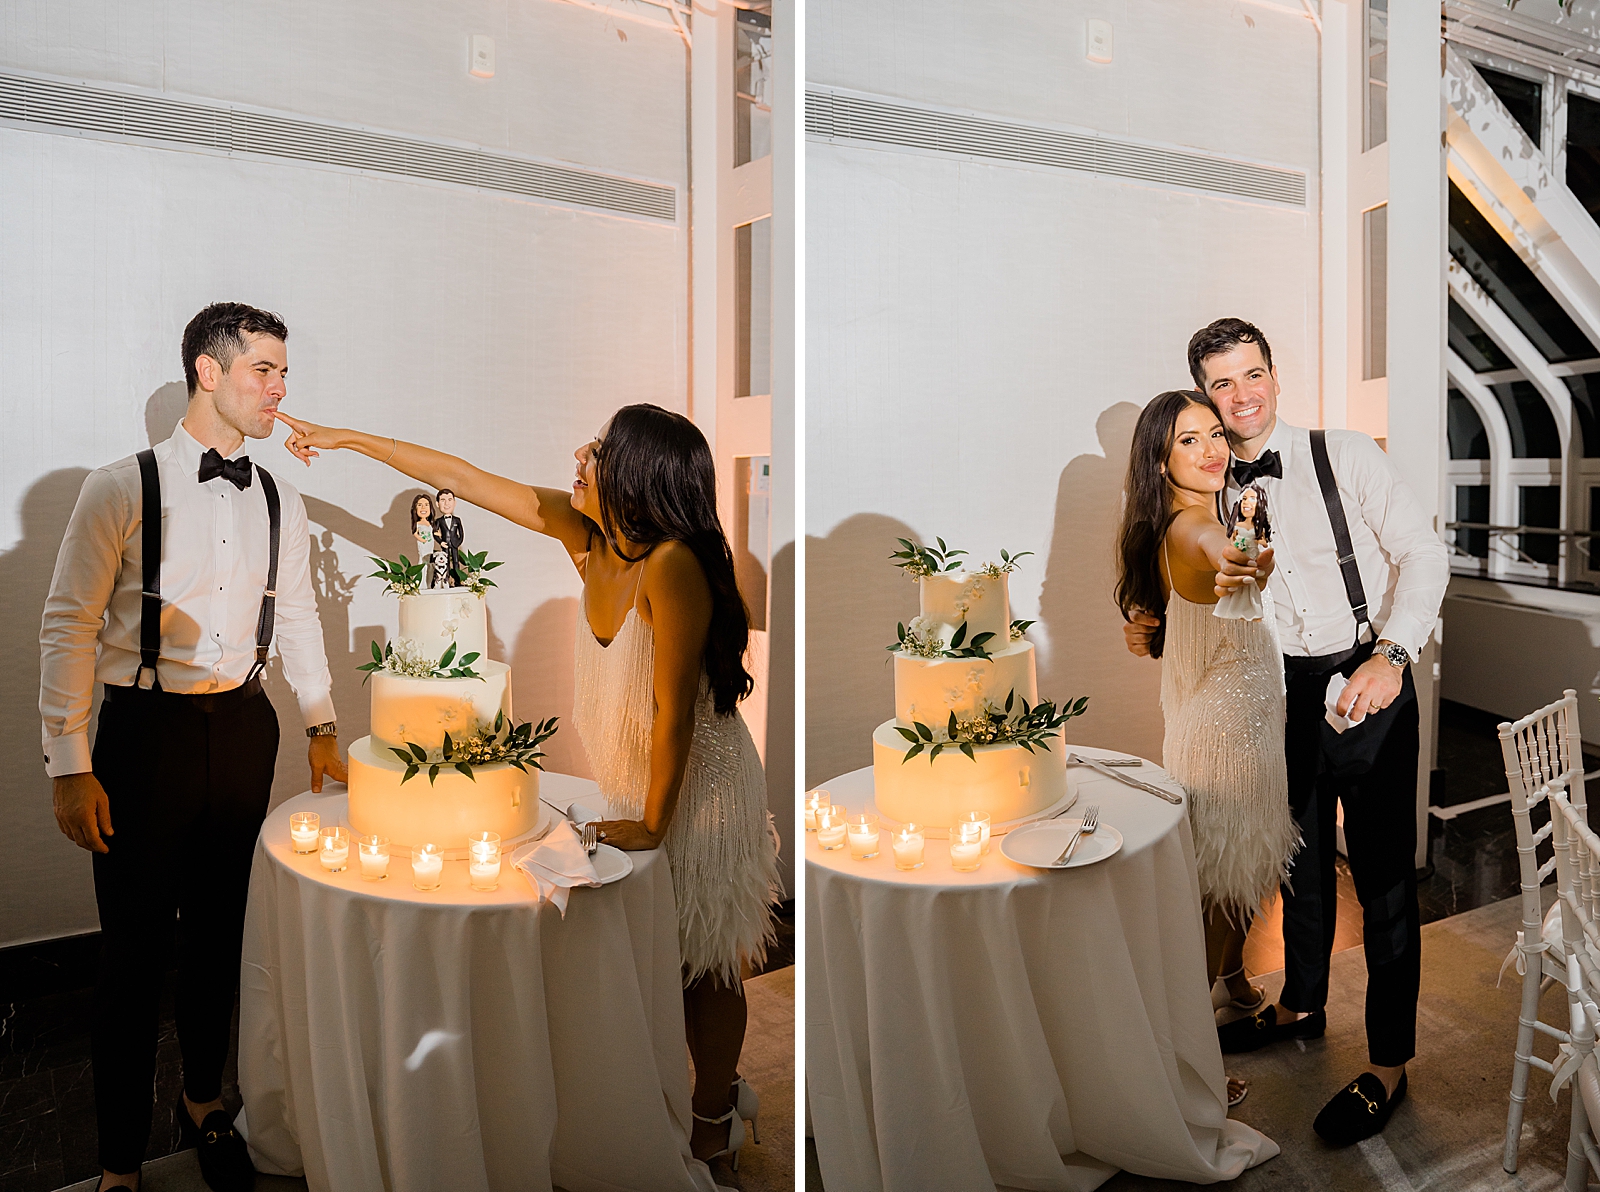 Left photo: Shot of the bride feeding the groom frosting from their cake. 
Right photo: The bride and groom pose with their cake topper.